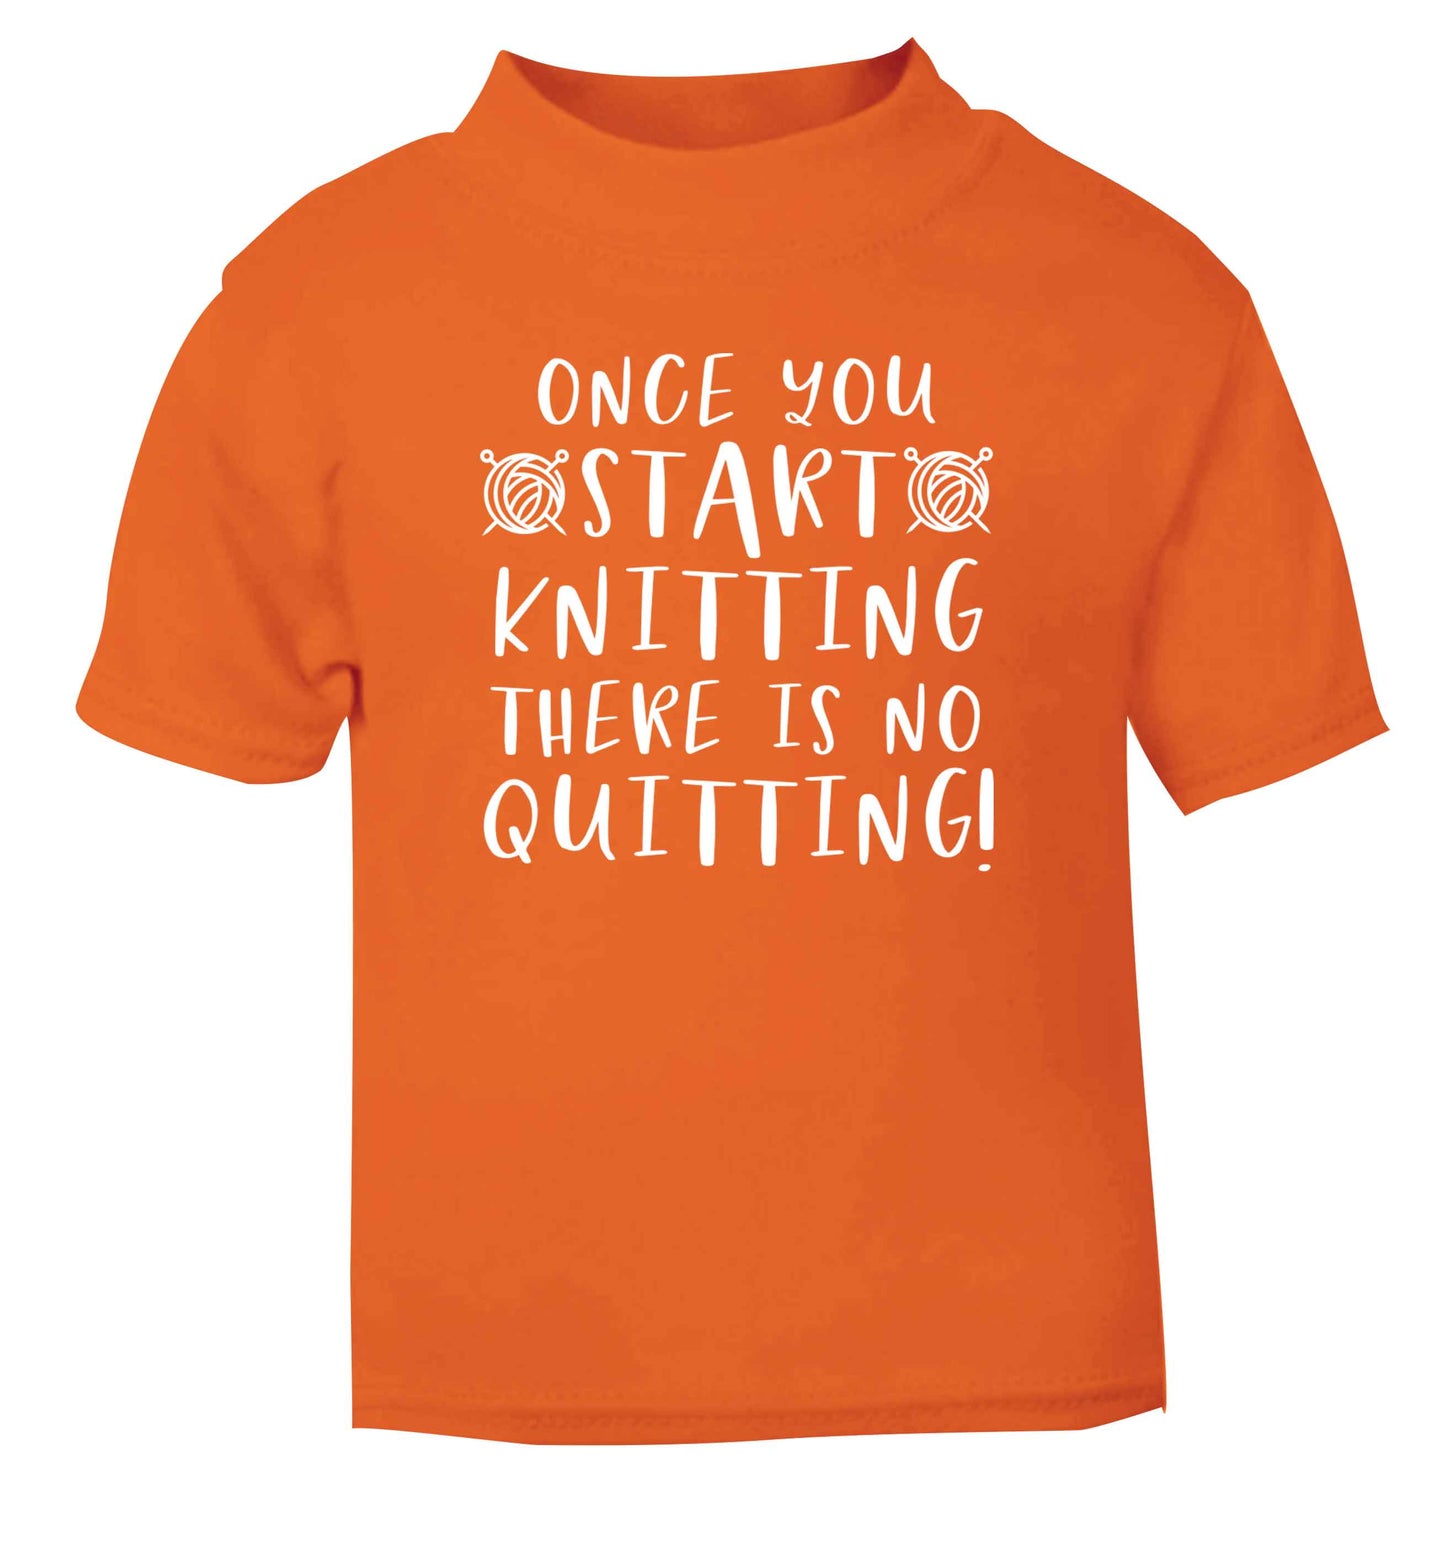 Once you start knitting there is no quitting! orange Baby Toddler Tshirt 2 Years